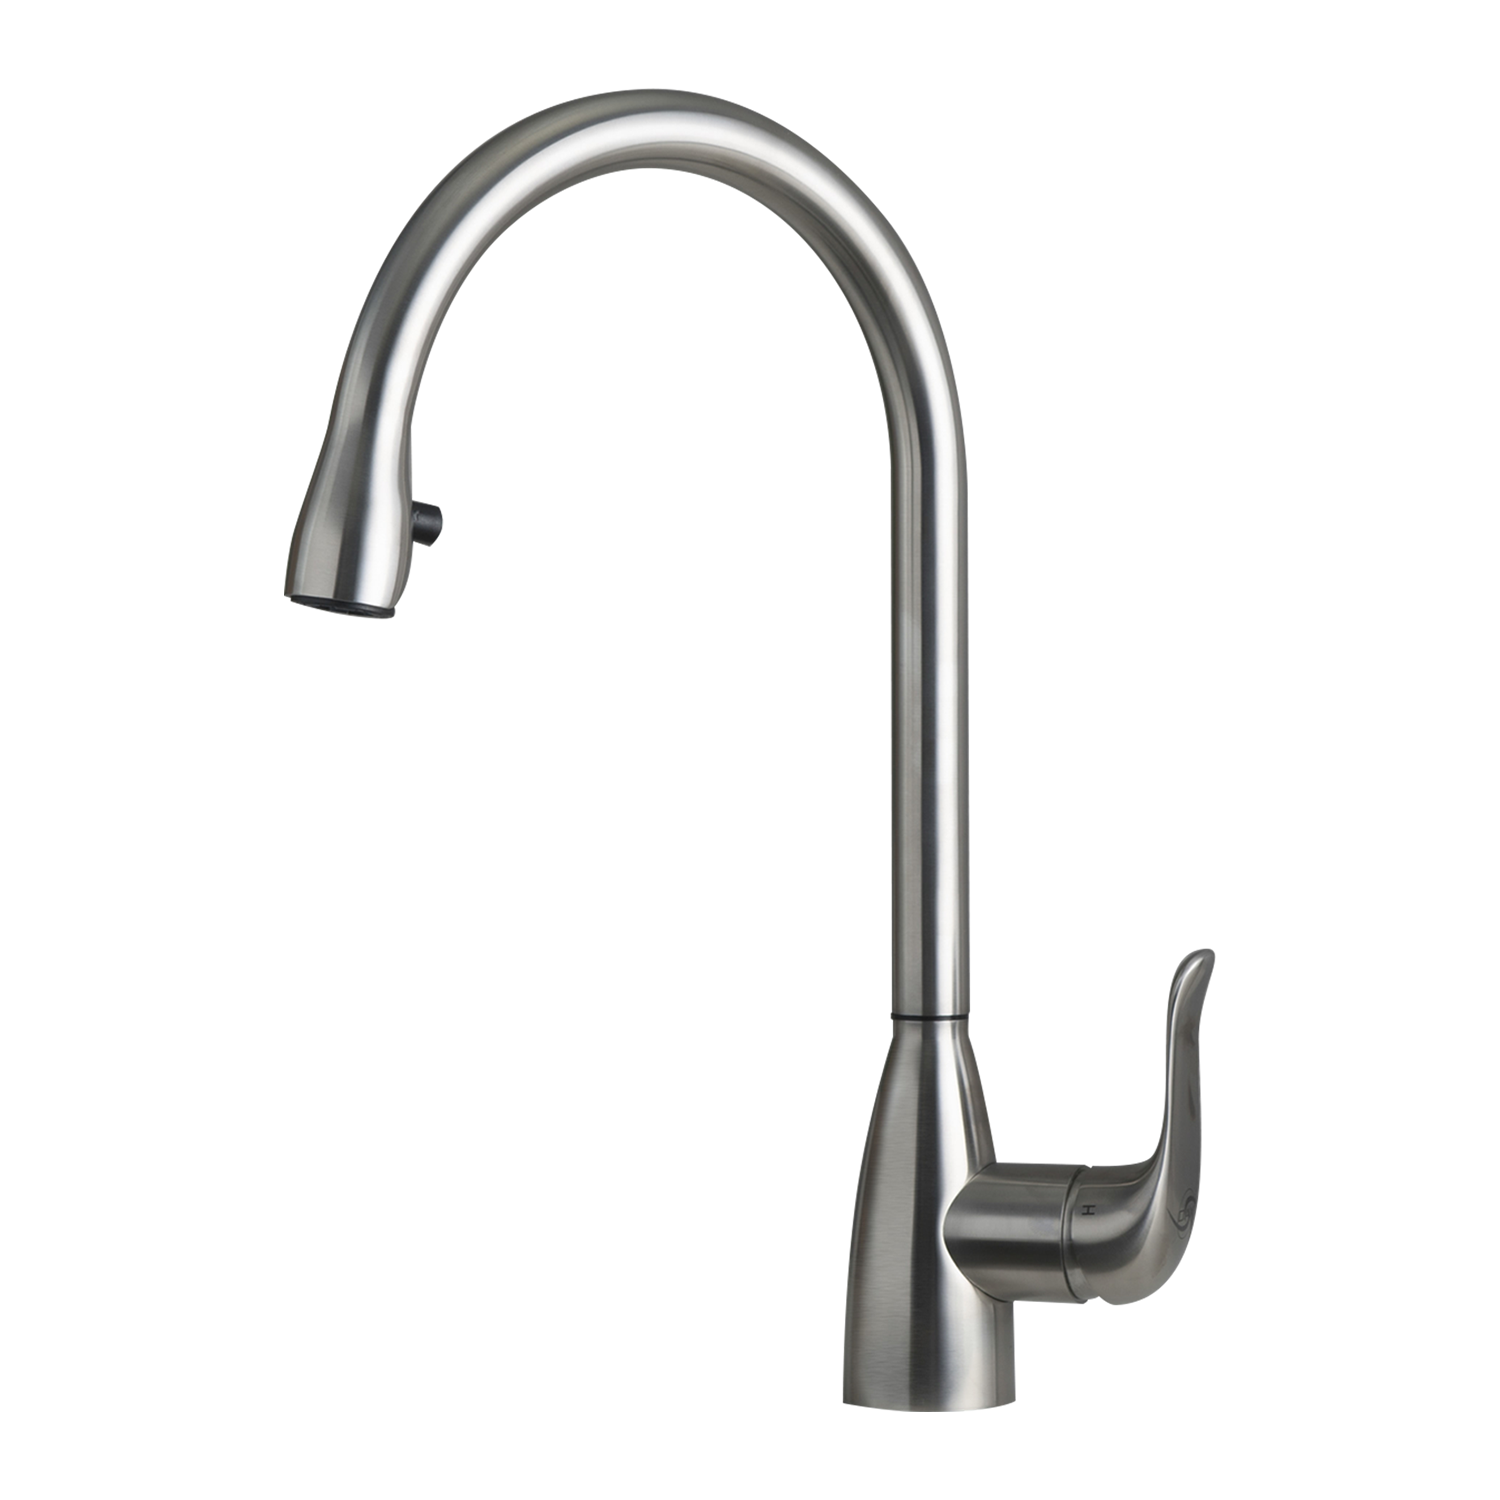 DAX Single Handle Pull Down Kitchen Faucet with Hidden Shower Head, Stainless Steel Body, Brushed Finish, Size 8-3/4 x 16-5/16 Inches (DAX-C17S)